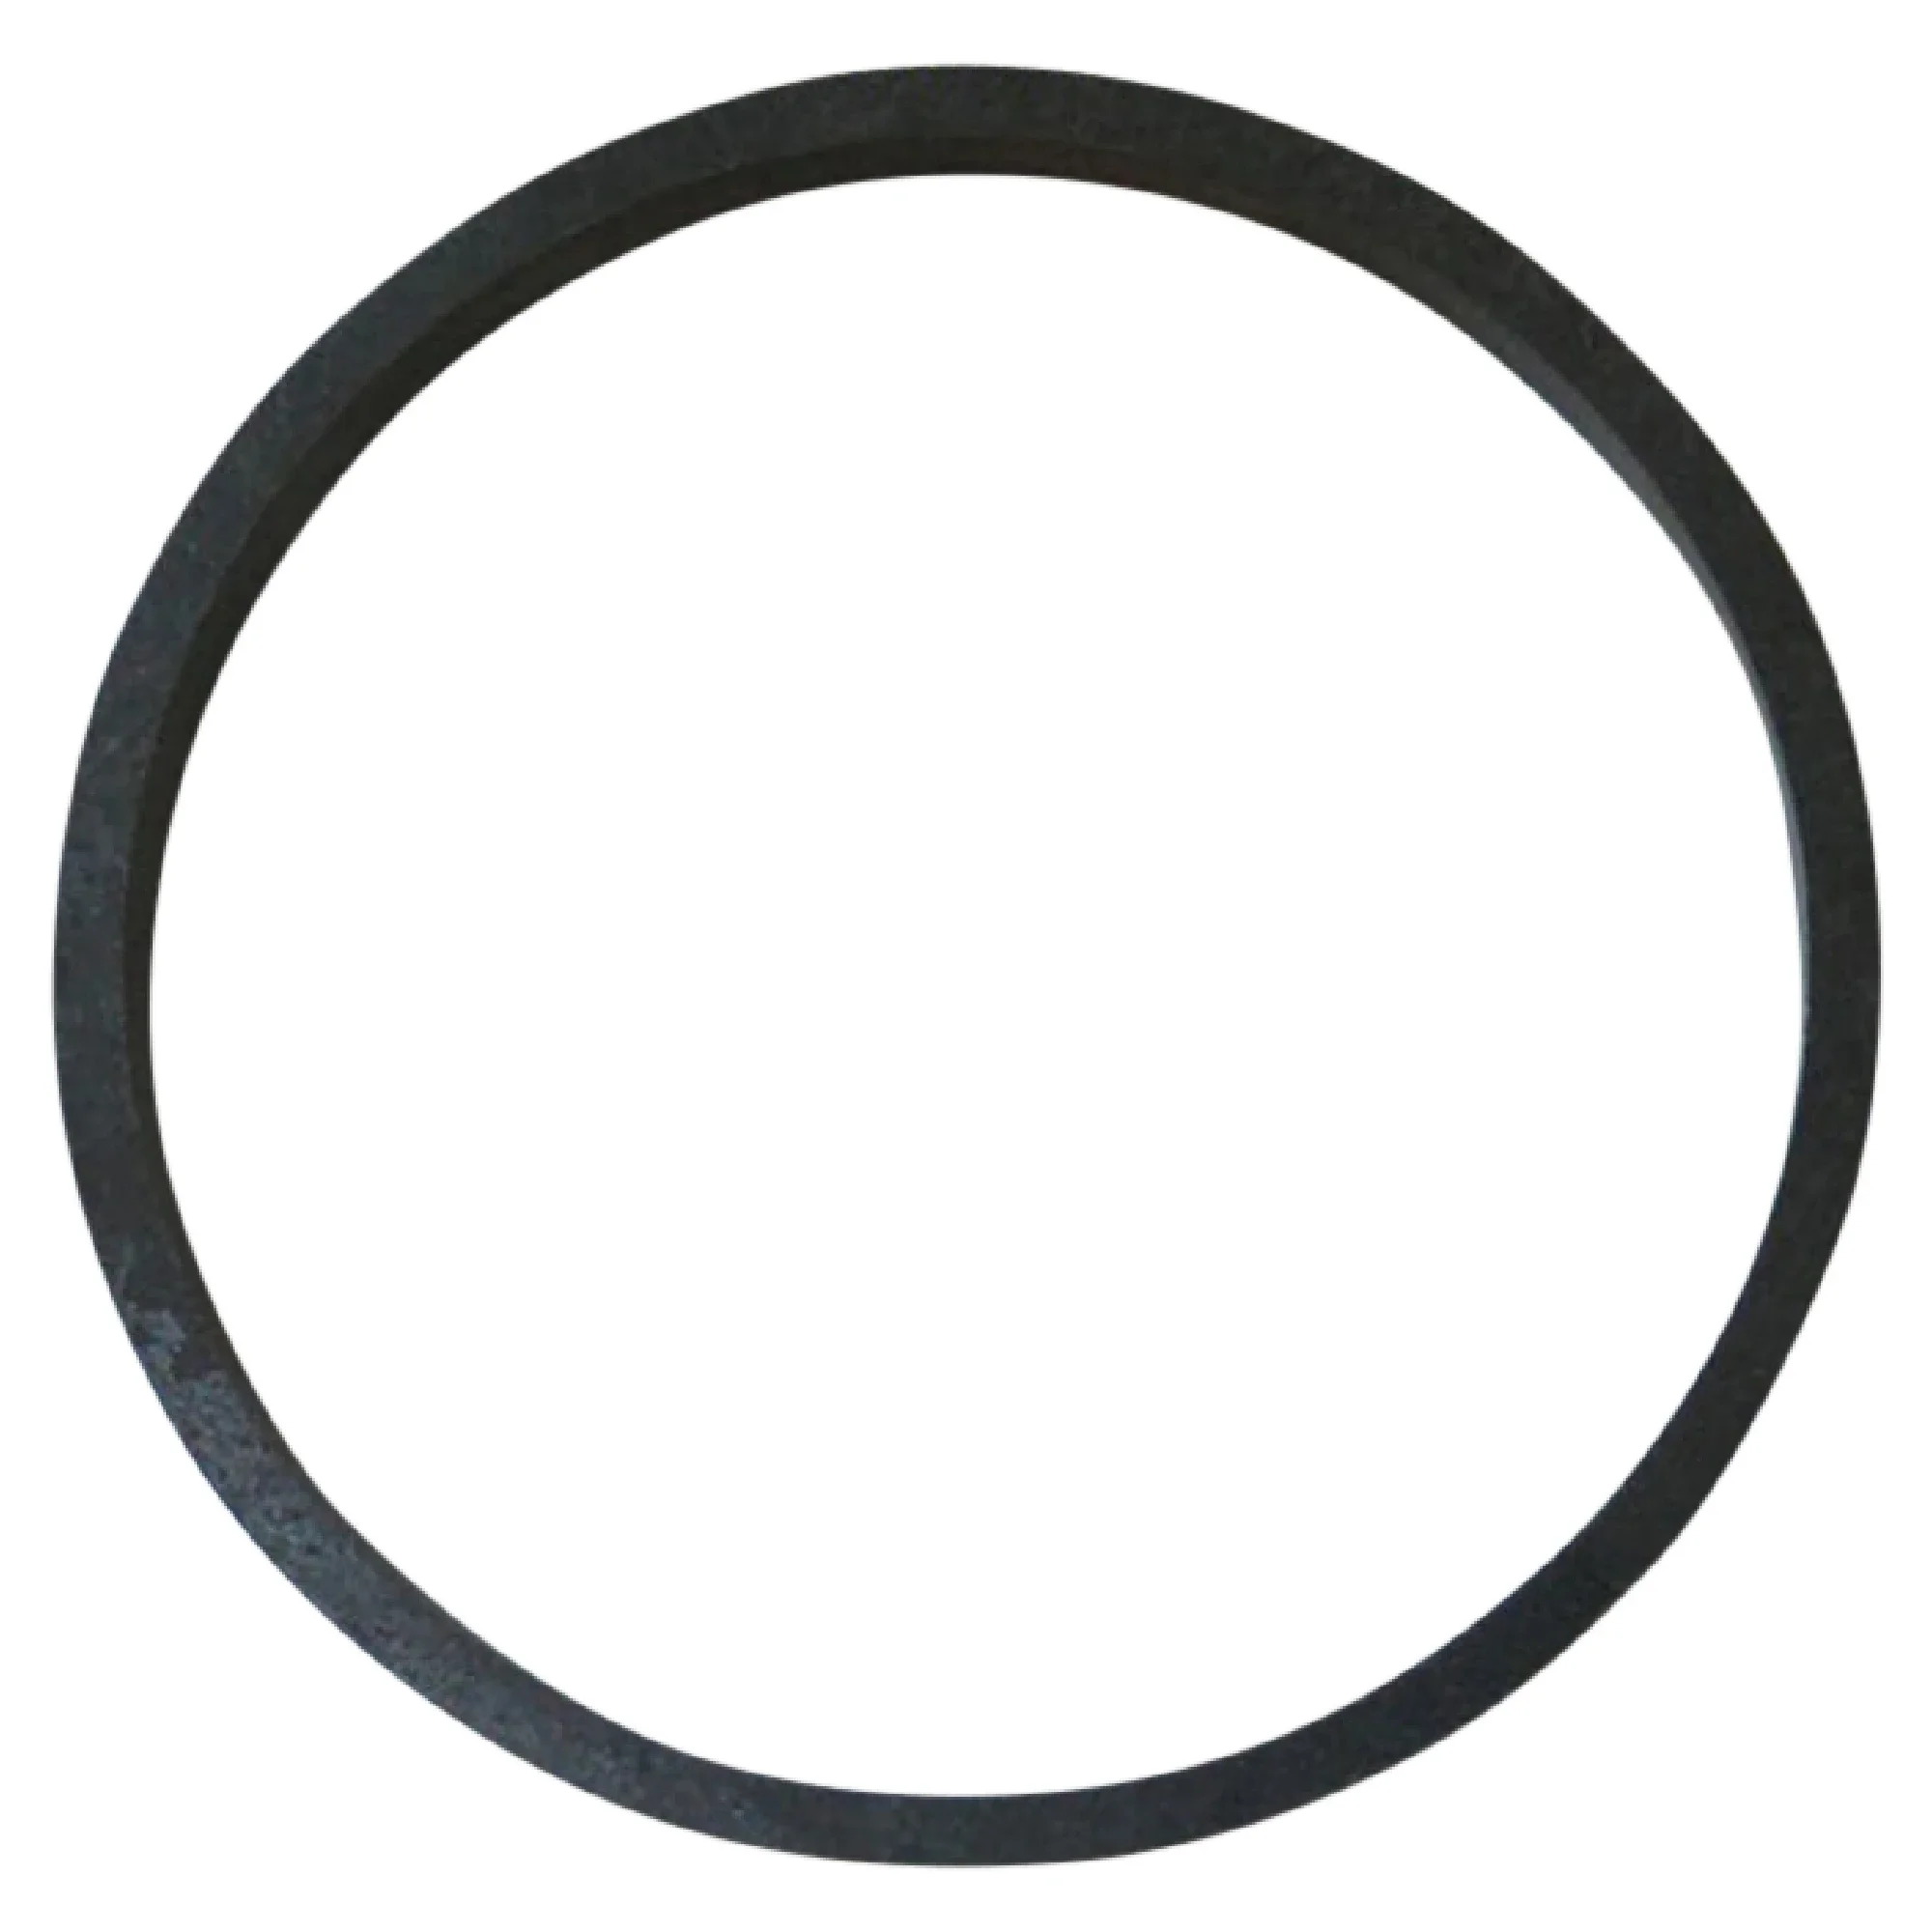 Wastebuilt® Replacement for Heil Spacer Ring, Stop, Torque Tube